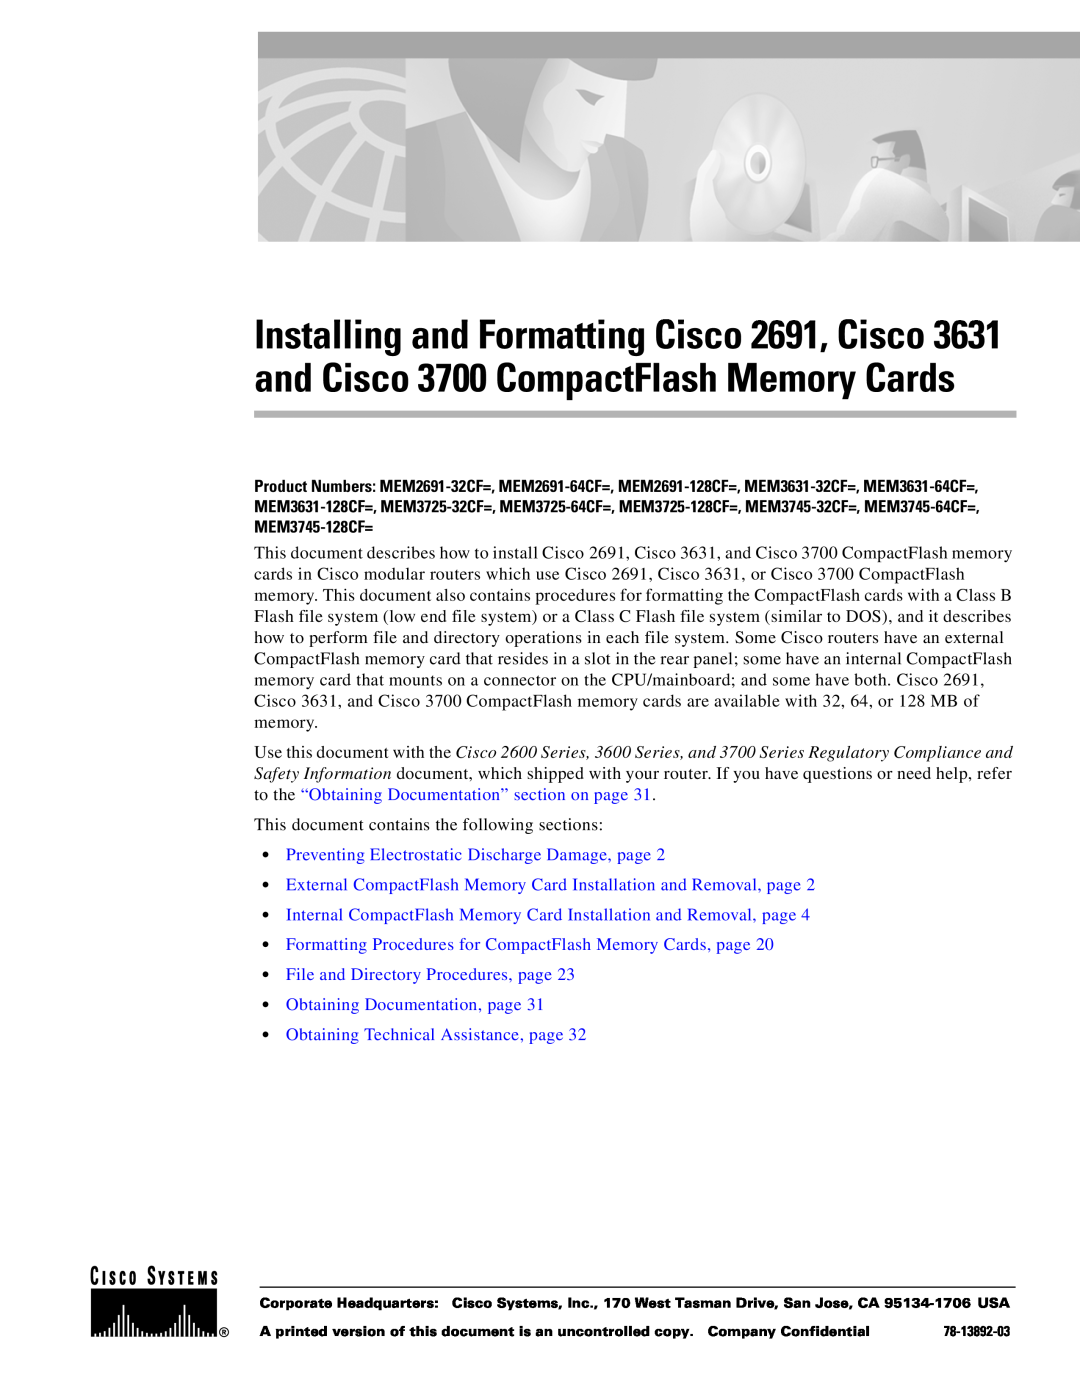 Cisco Systems 2691, 3631 manual Preventing Electrostatic Discharge Damage, page, Obtaining Technical Assistance, page 